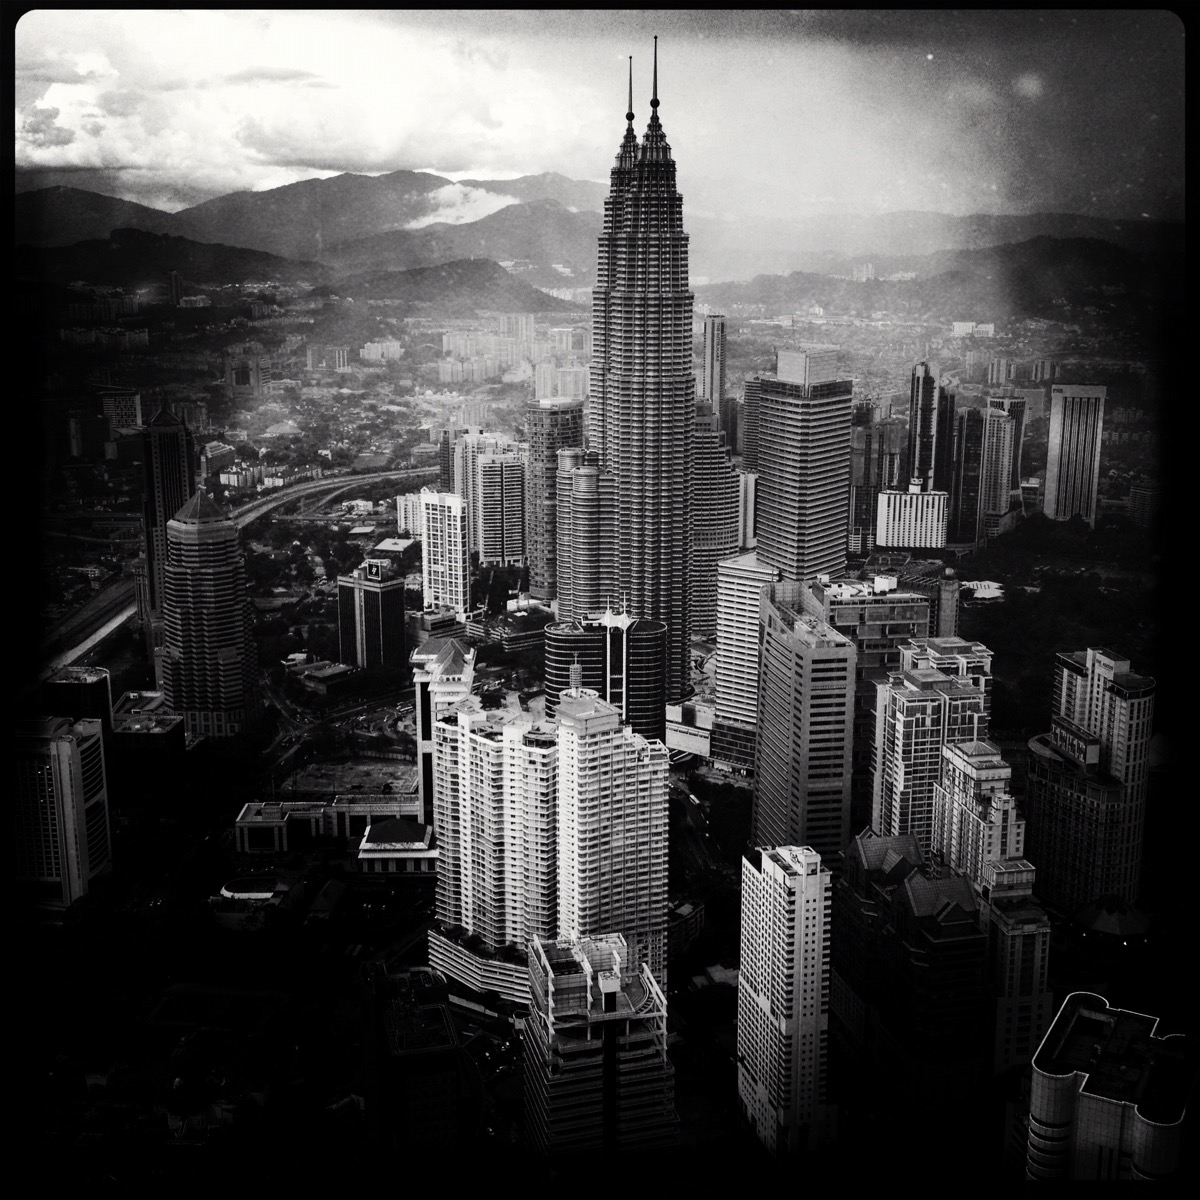 KL From Above